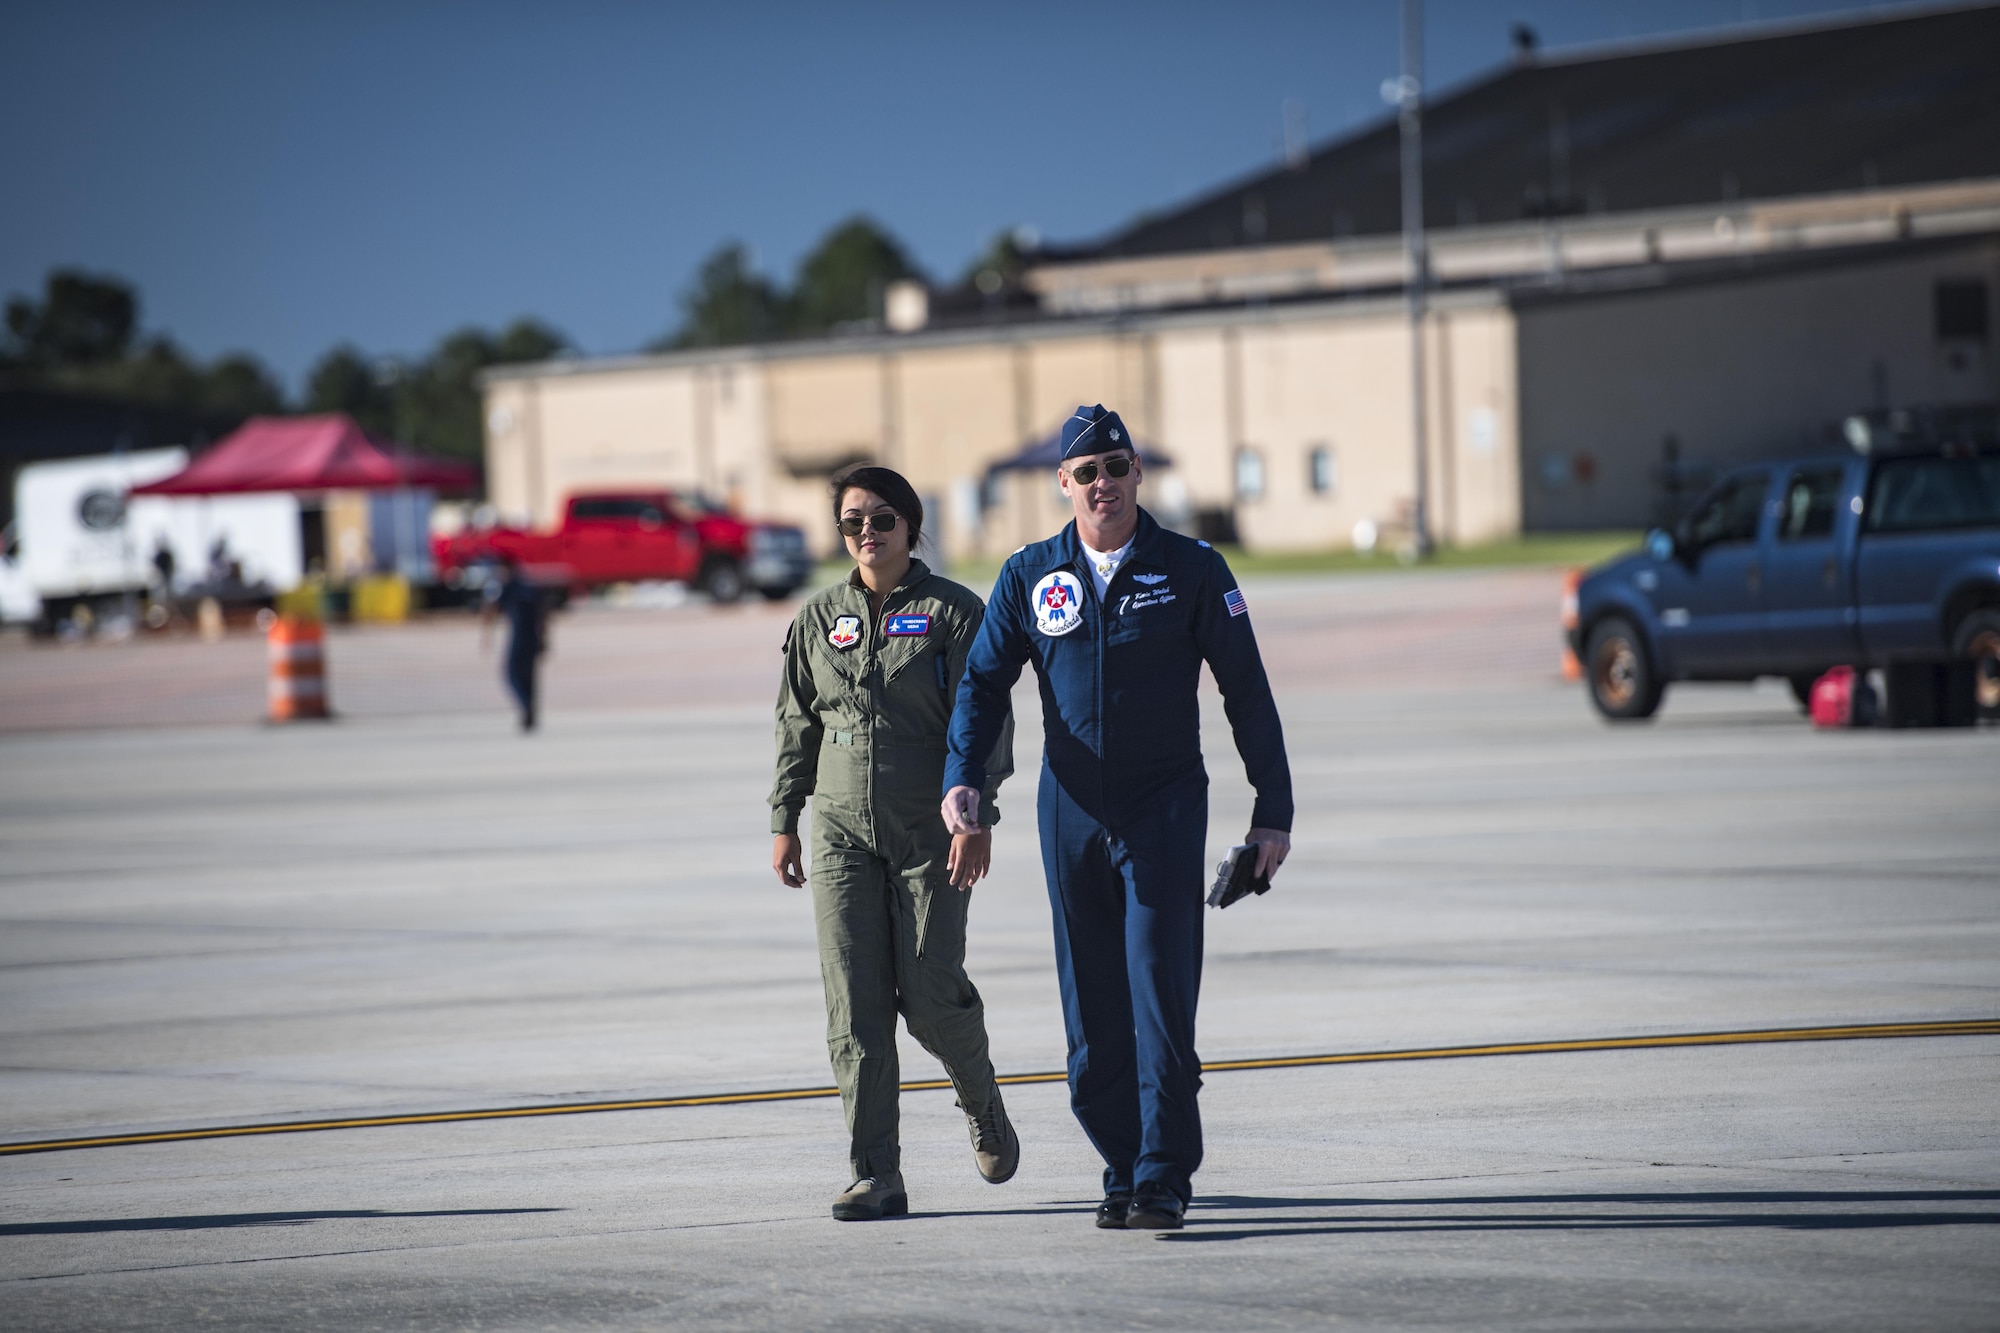 Noelani Mathews, multimedia journalist, walks with Lt. Col. Kevin Walsh, U.S. Air Force Thunderbird pilot No. 7, before her media flight in an F-16D Fighting Falcon, Oct. 27, 2017, at Moody Air Force Base, Ga. The Thunderbirds, based out of Nellis Air Force Base, Nev., are the Air Force’s premier aerial demonstration team, performing at air shows and special events worldwide. (U.S. Air Force photo by Senior Airman Janiqua P. Robinson)